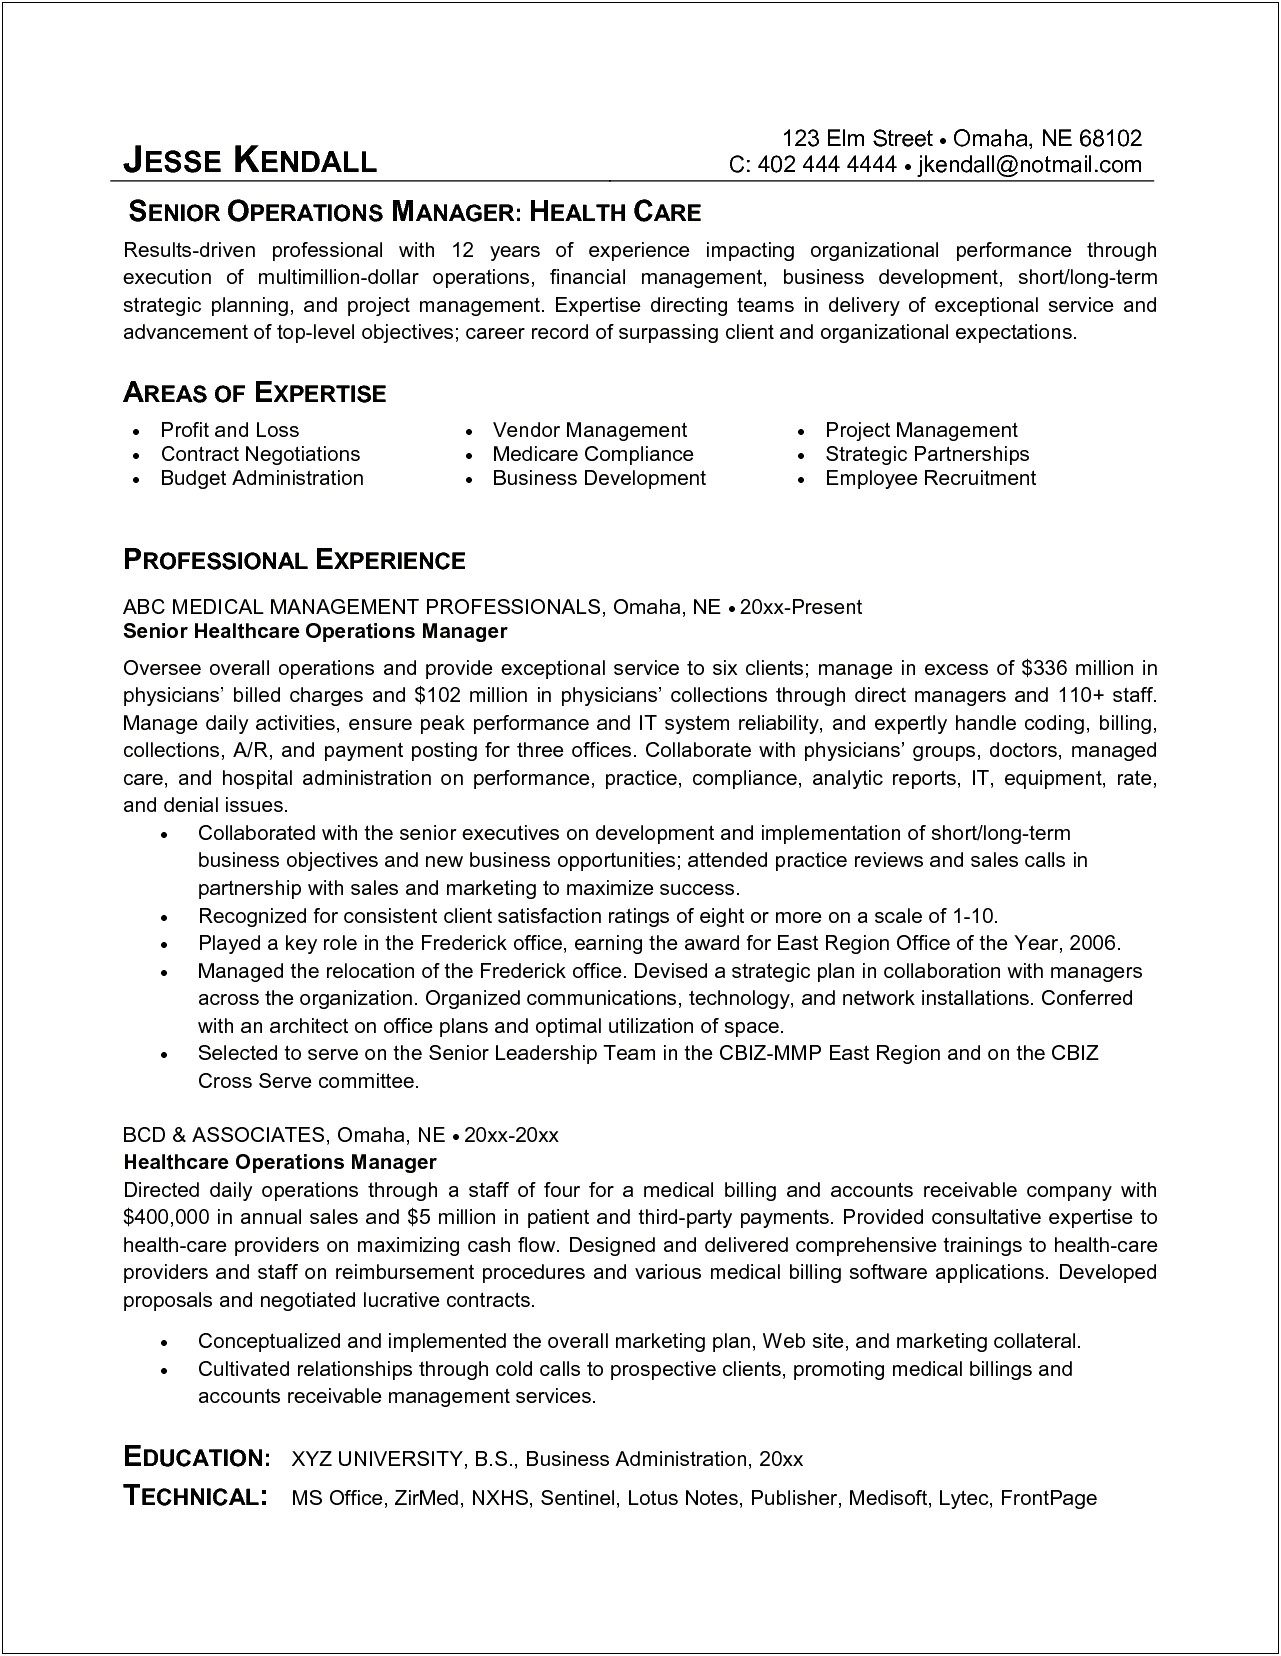 Resume Examples For Operations Manager Position Objective